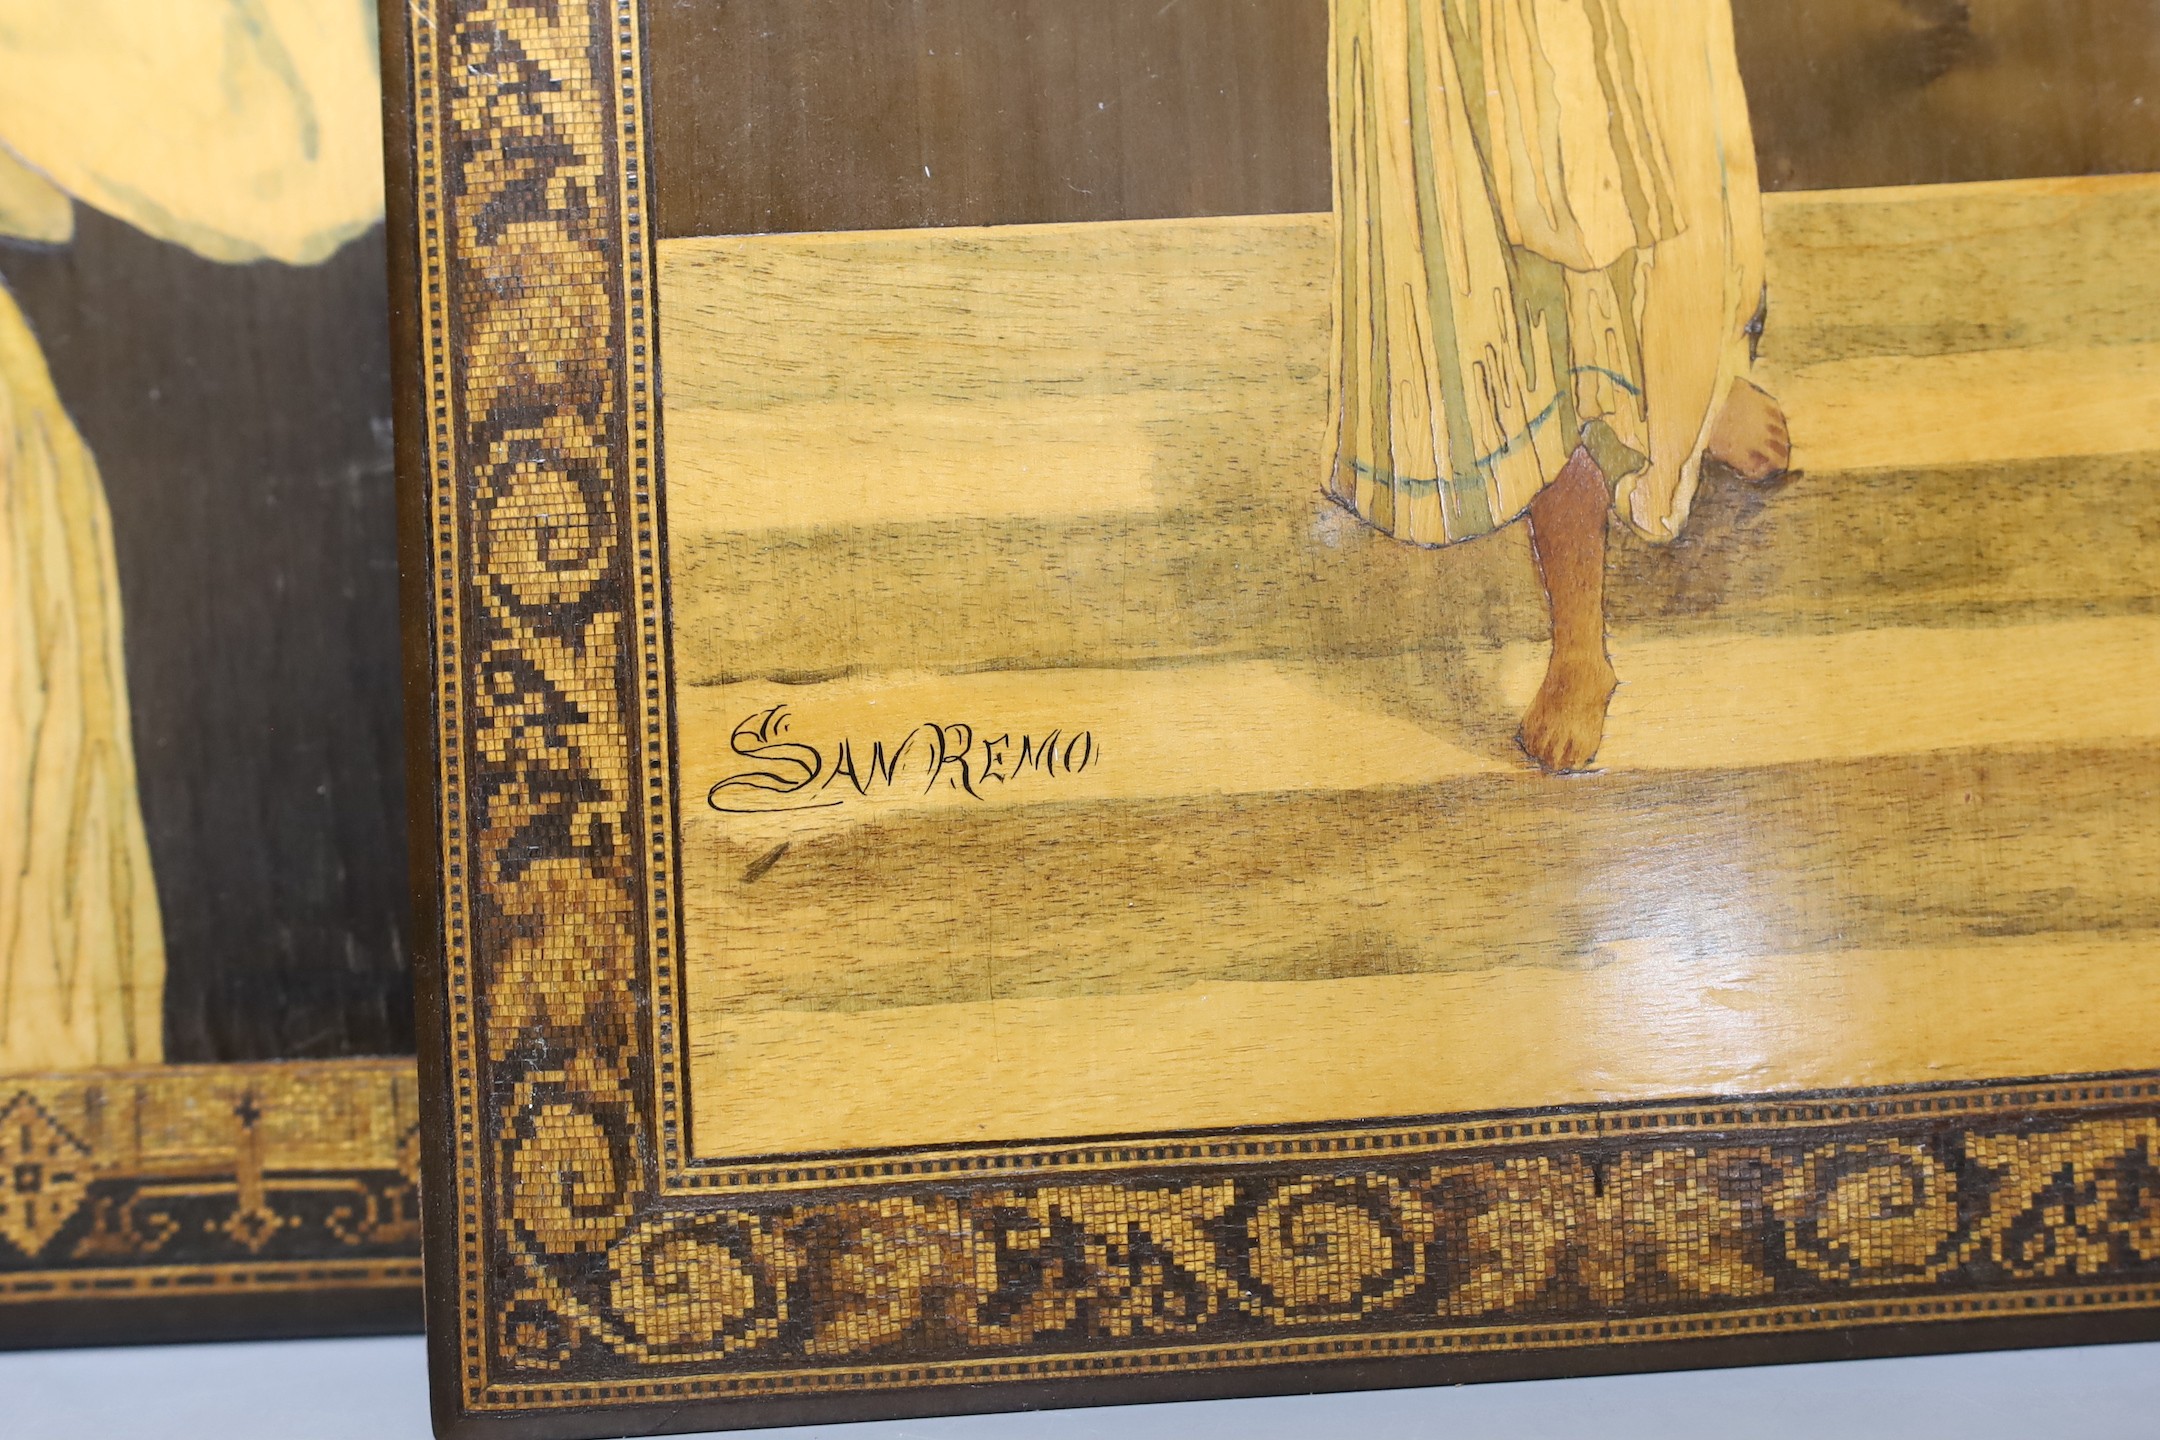 Two 19th century Sorento marquetry panels, both signed, San Remo and Gargiule, largest 38x26cm - Image 4 of 6